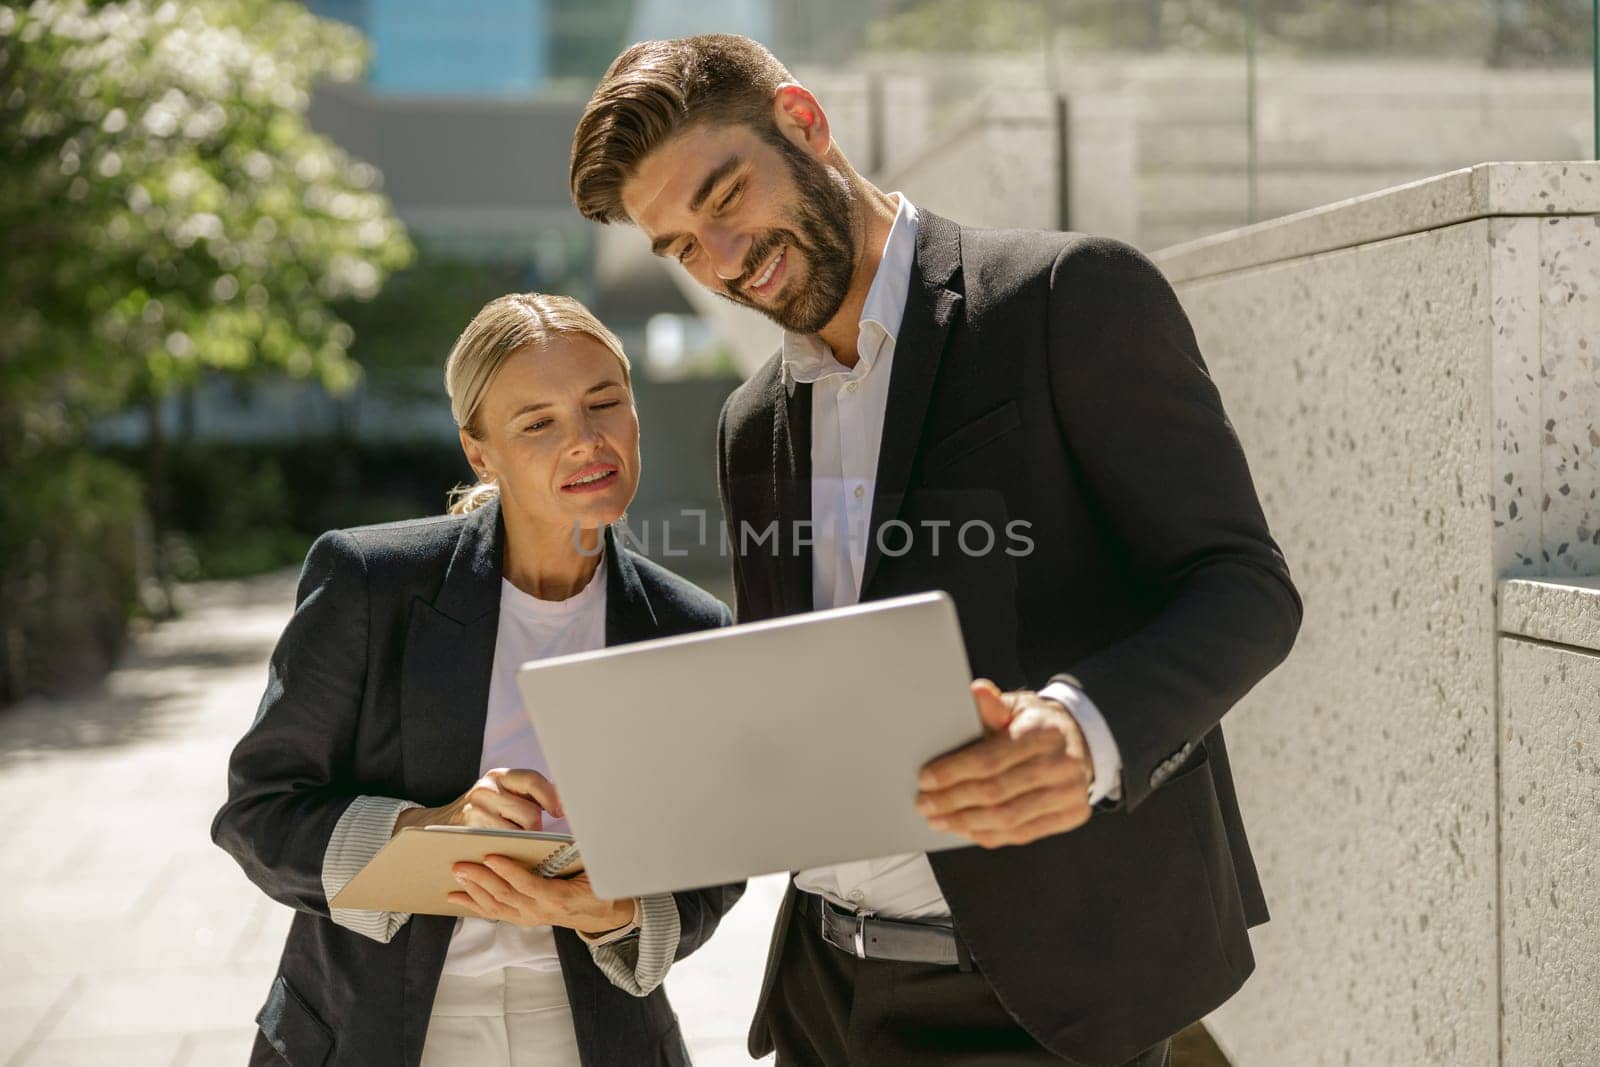 Man and woman in classic suit discussing business details and using laptop while standing outdoors